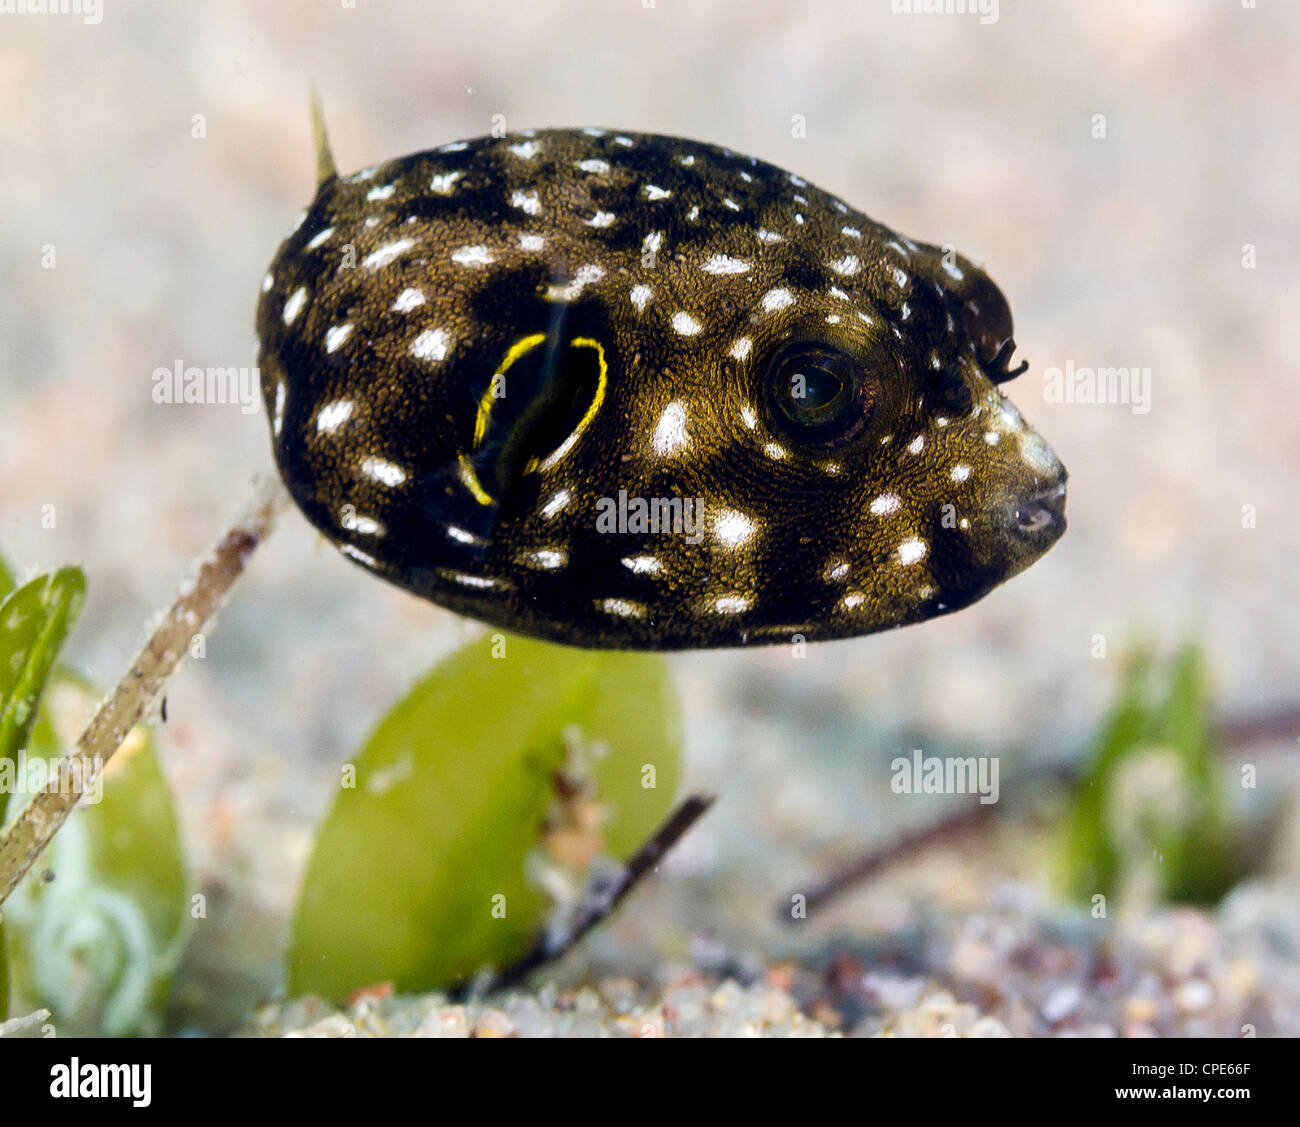 Top 104+ Images flat fish that hides in the sand Sharp